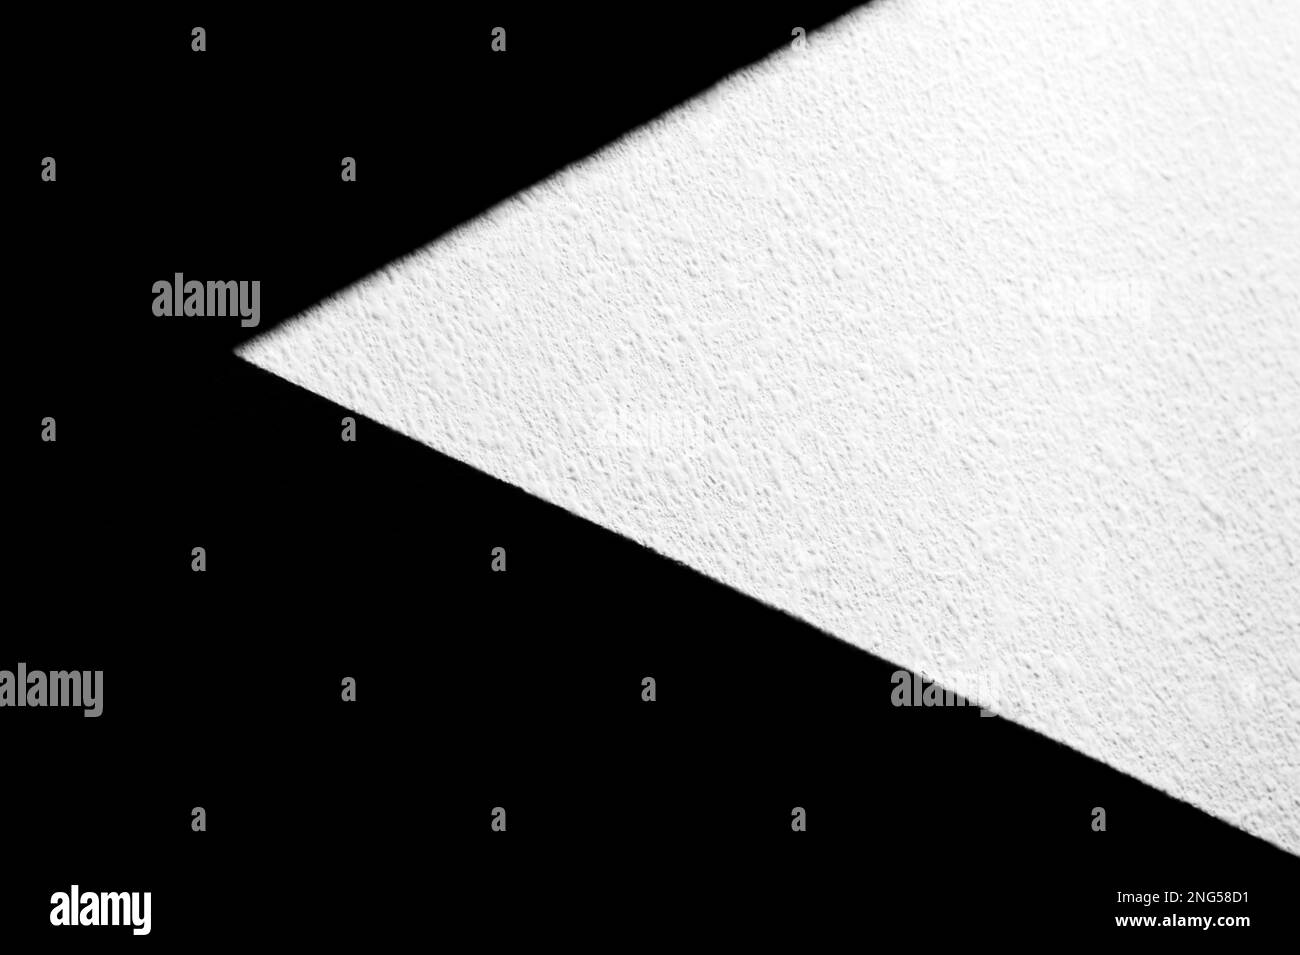 Abstract shapes, interior wall with triangles, light separations and patterns in black and white. Stock Photo